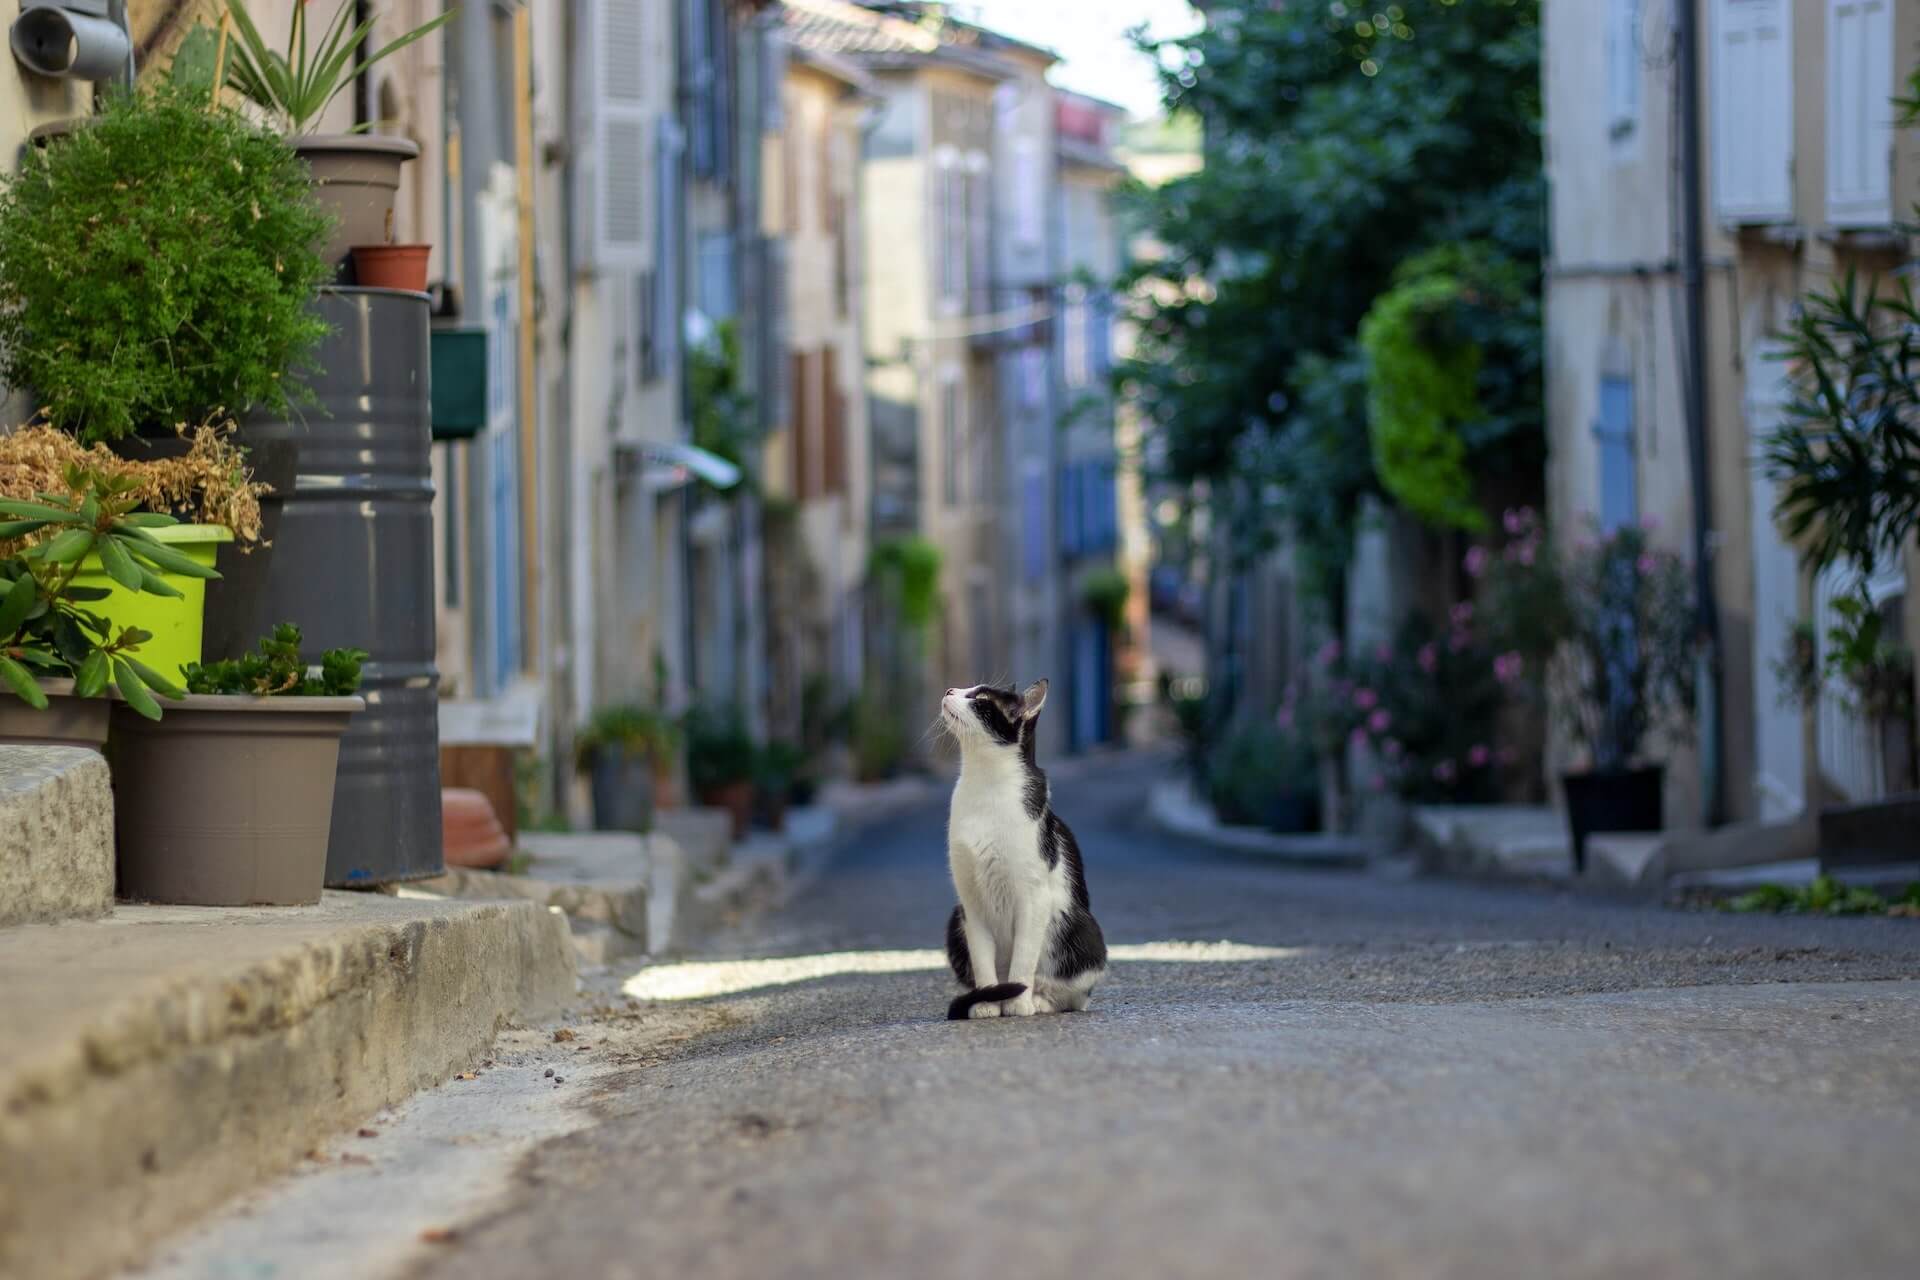 white and black cat sitting on a city street
